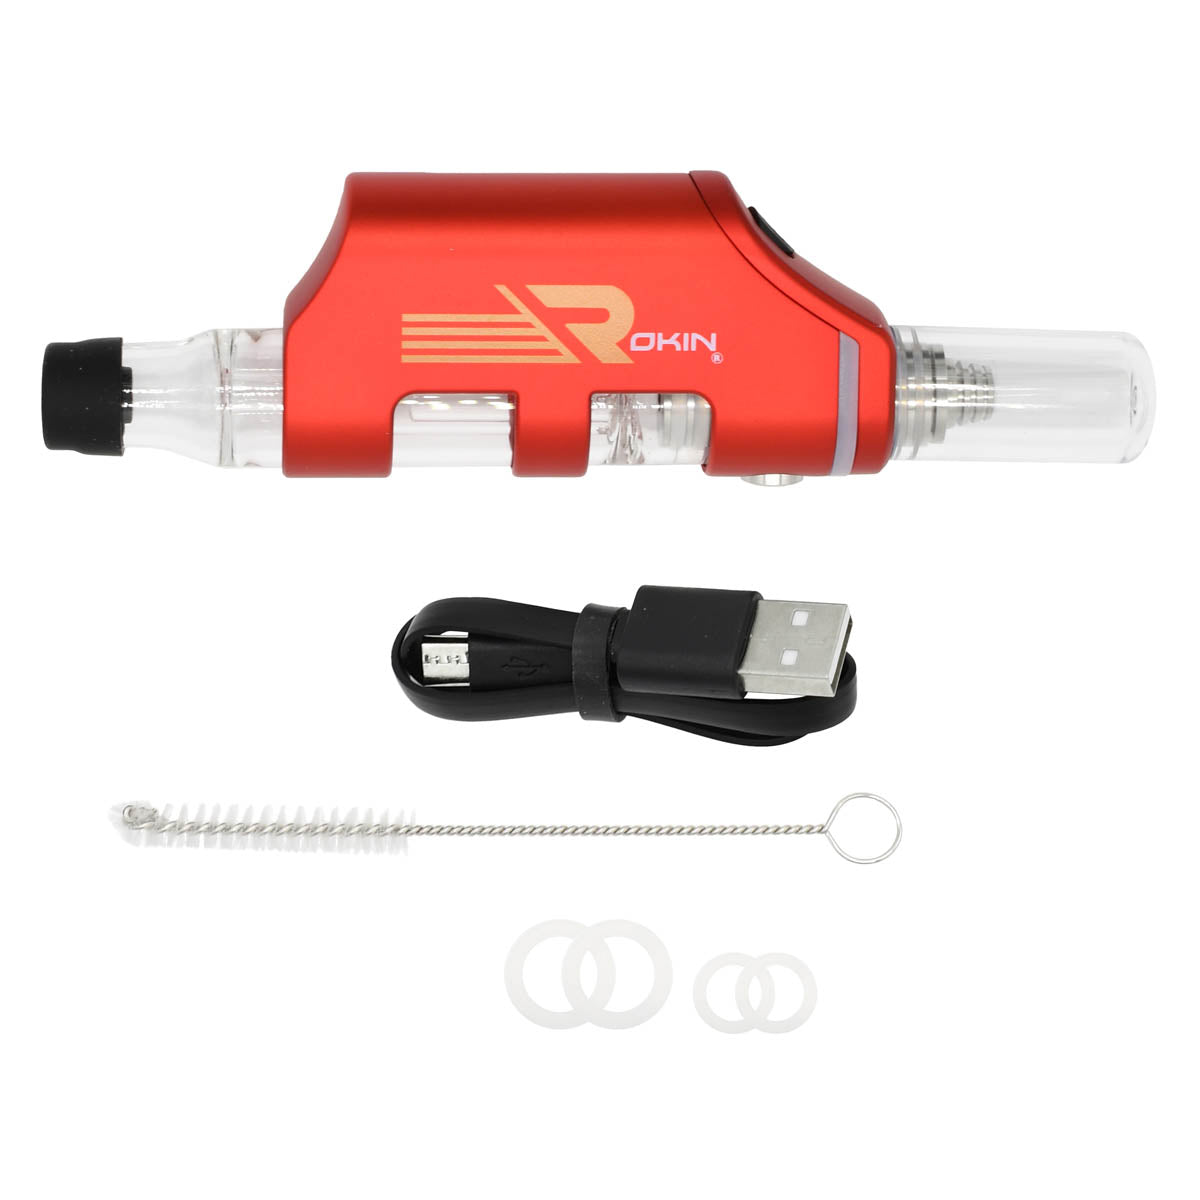 Stinger nectar collector kit elements - Red finish